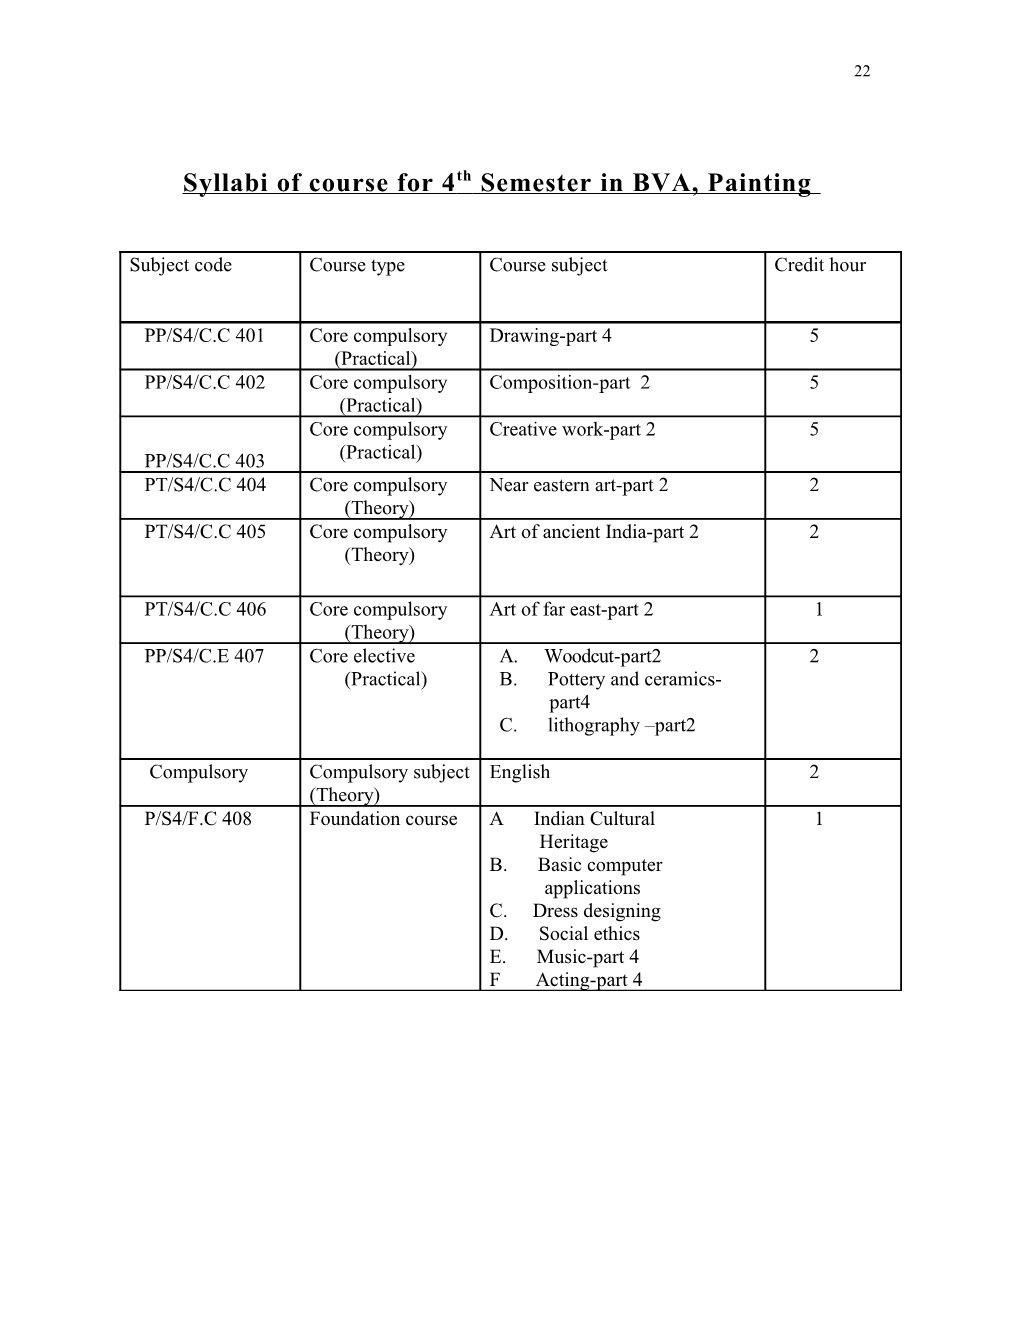 Syllabi of Course for 4Th Semester in BVA, Painting